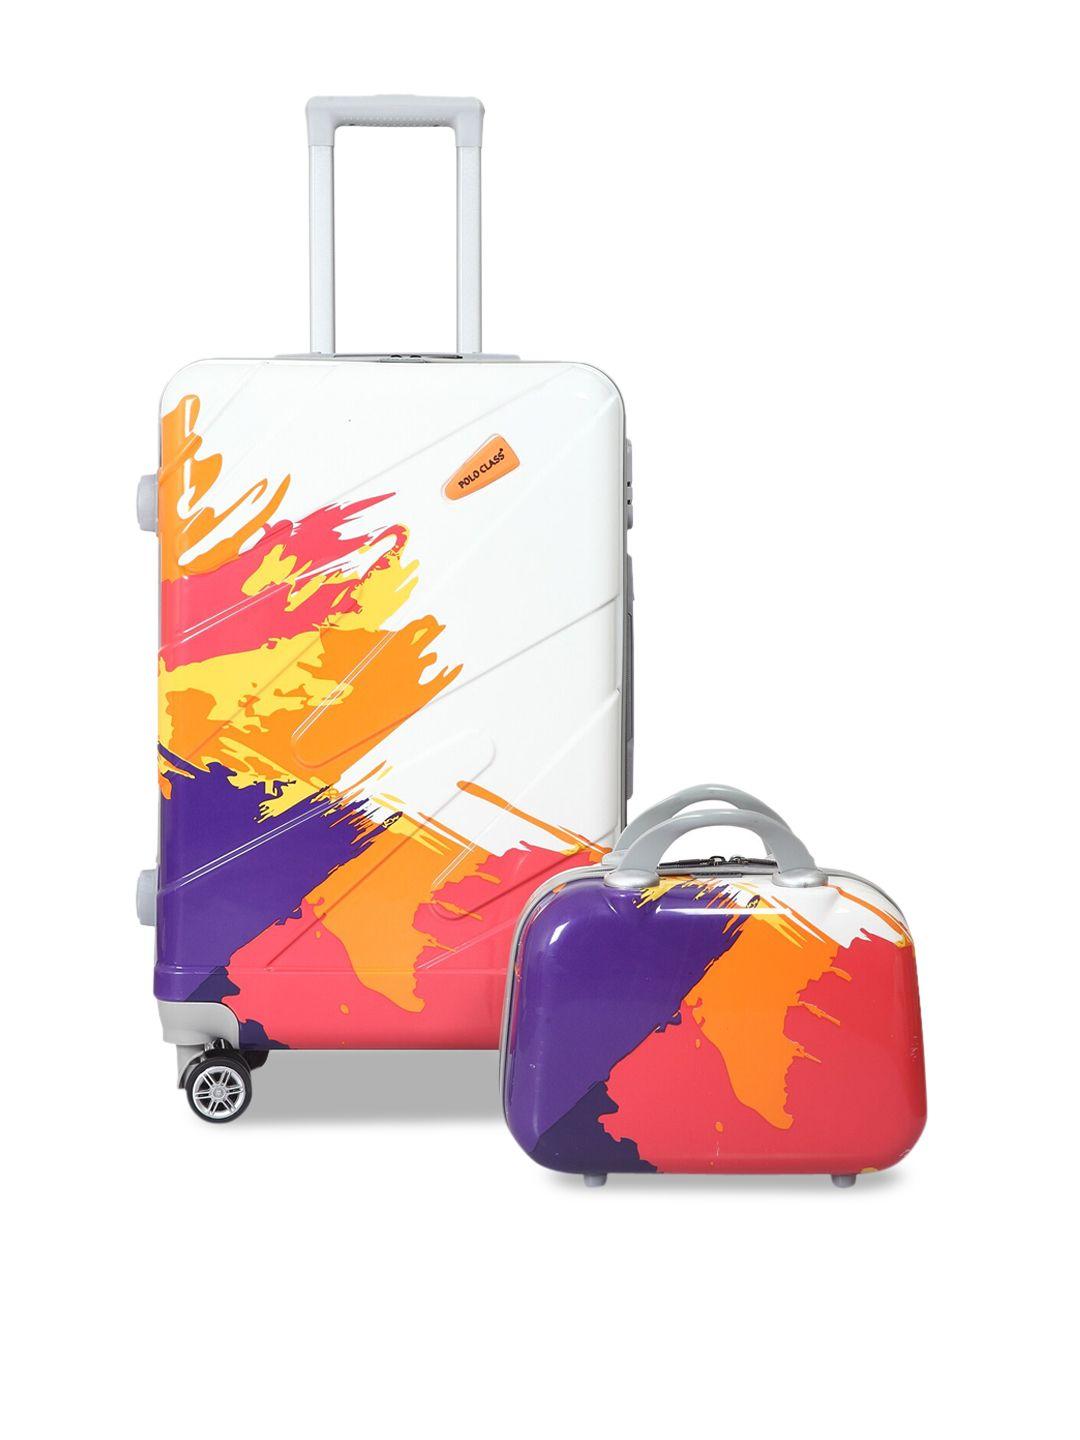 polo class 2-pieces printed hard case luggage trolley & vanity bag set- 50 cm